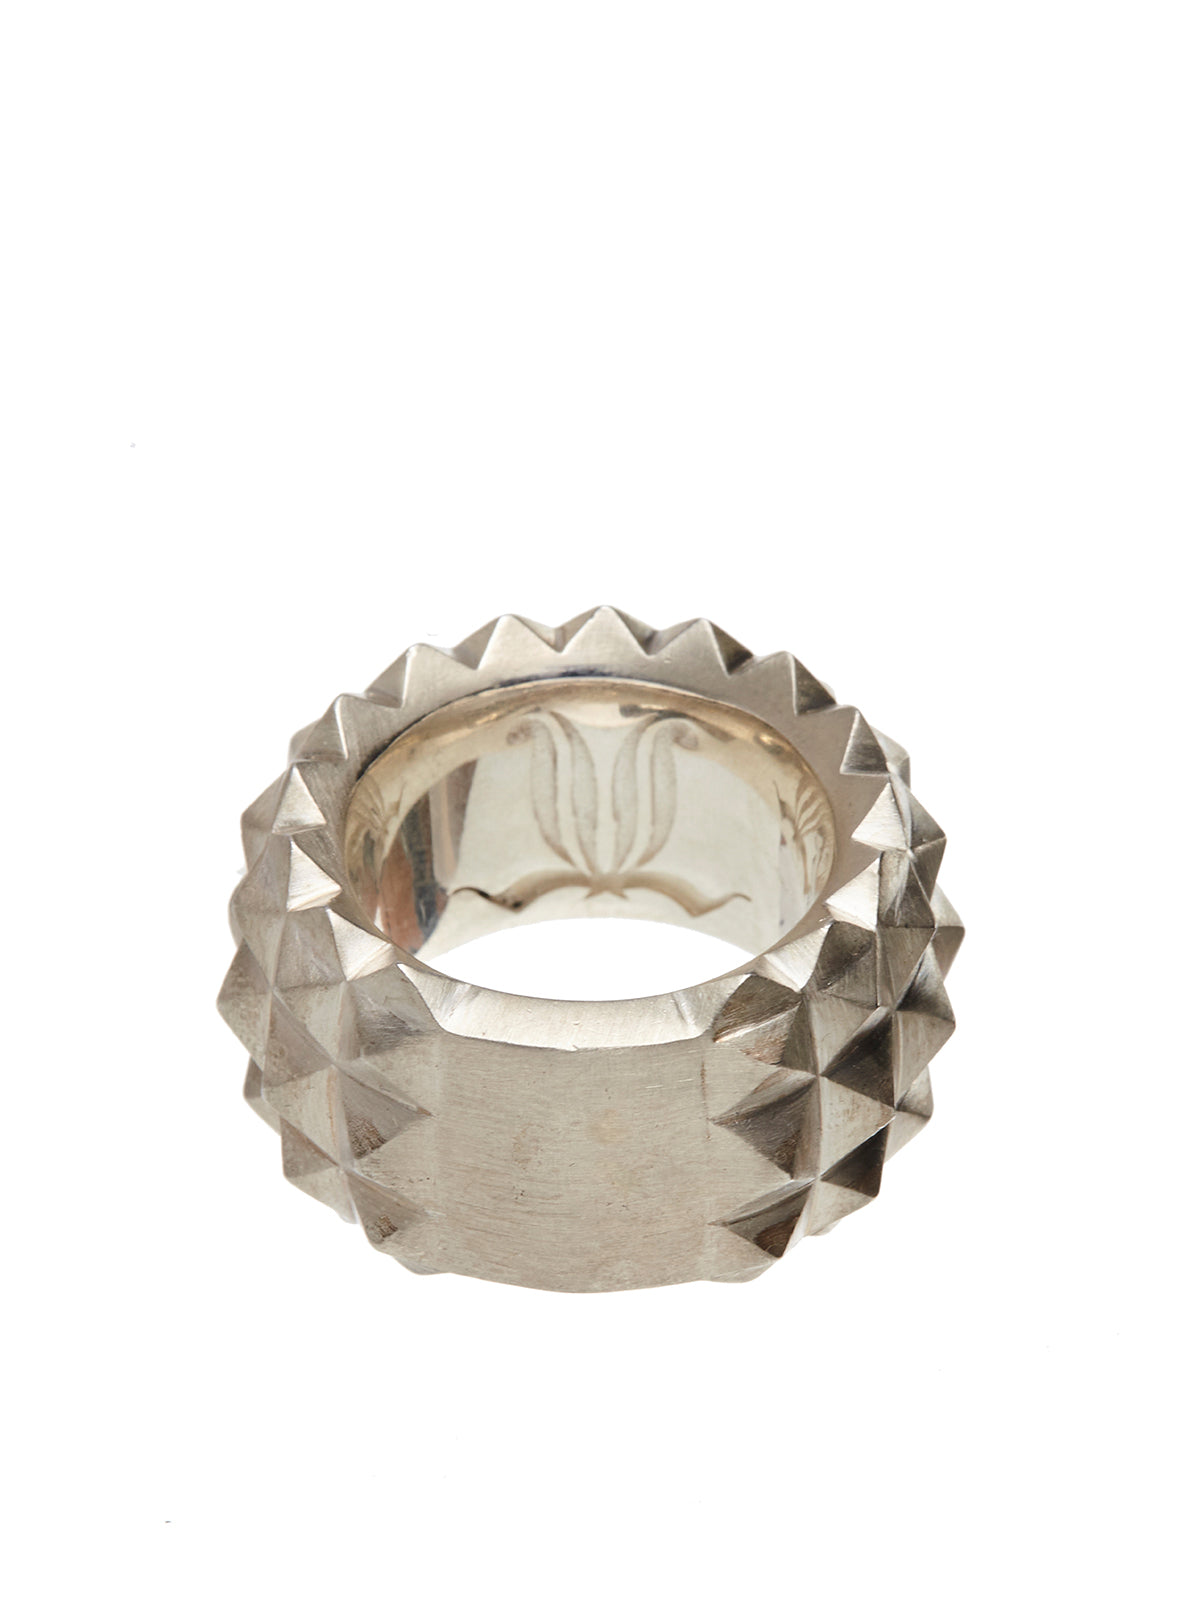 LEONY Stylish 925 Silver Ring for Men - Available in Multiple Sizes